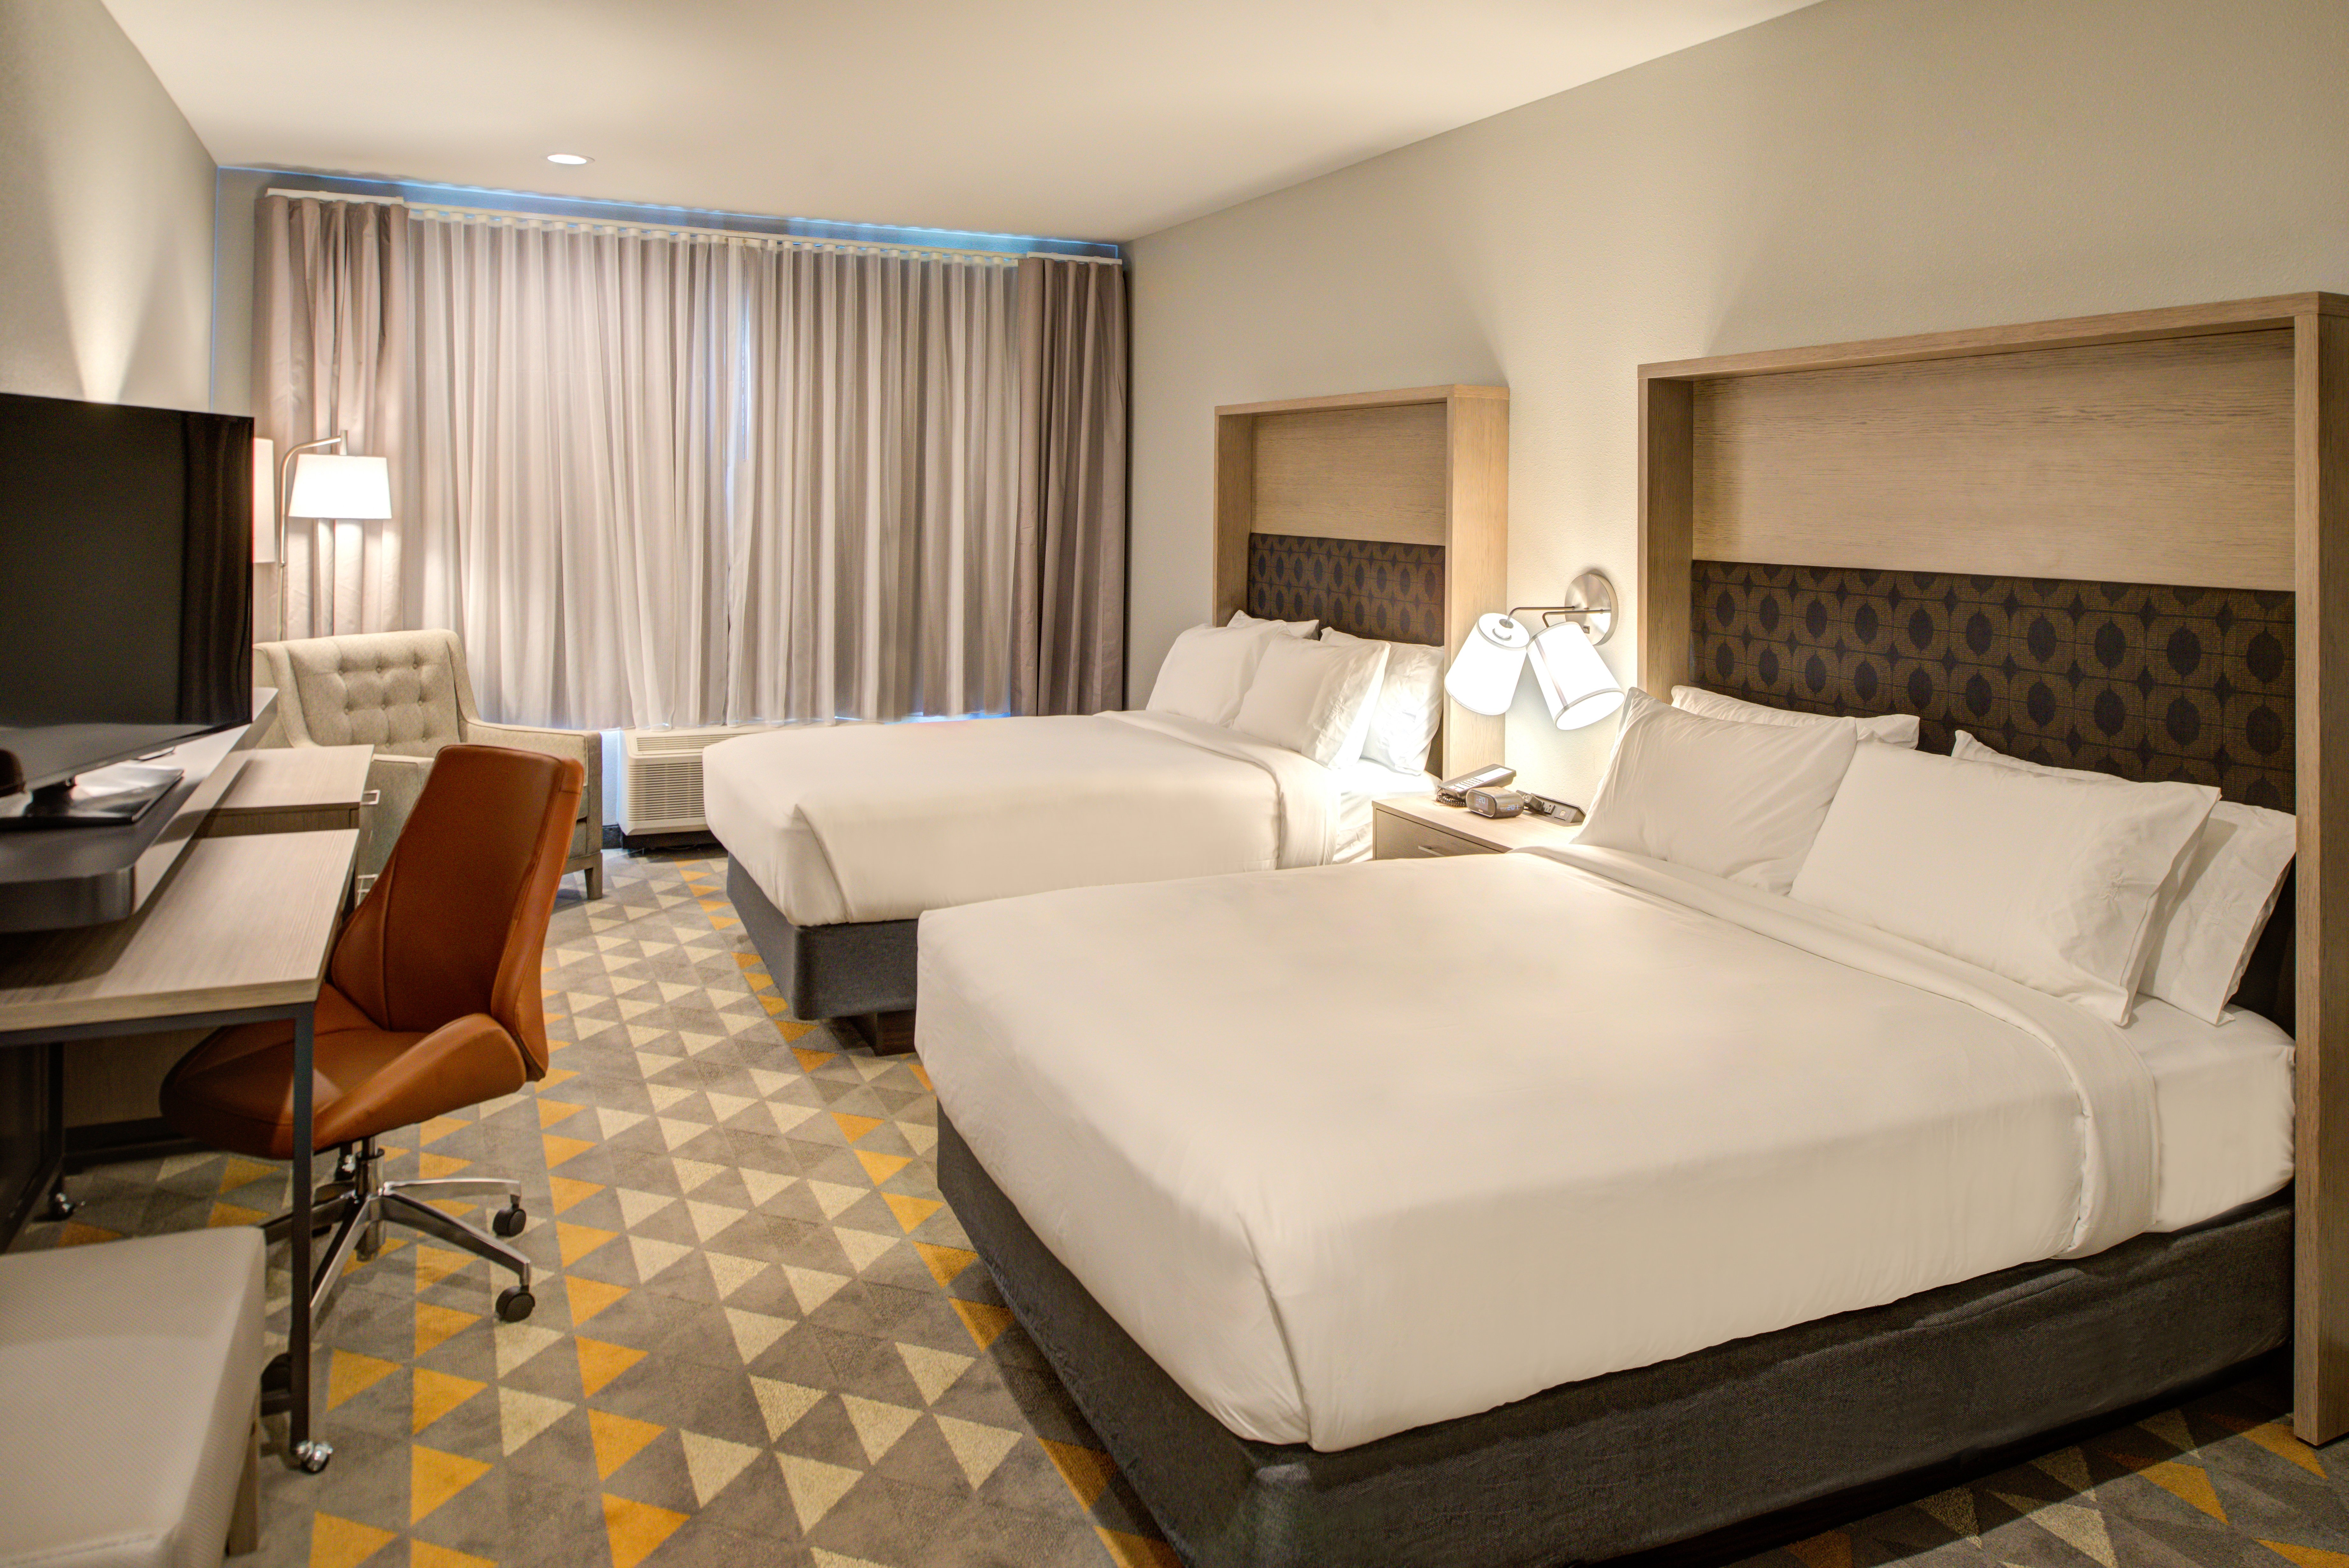 Stretch out and enjoy extra space in our Double Queen Room